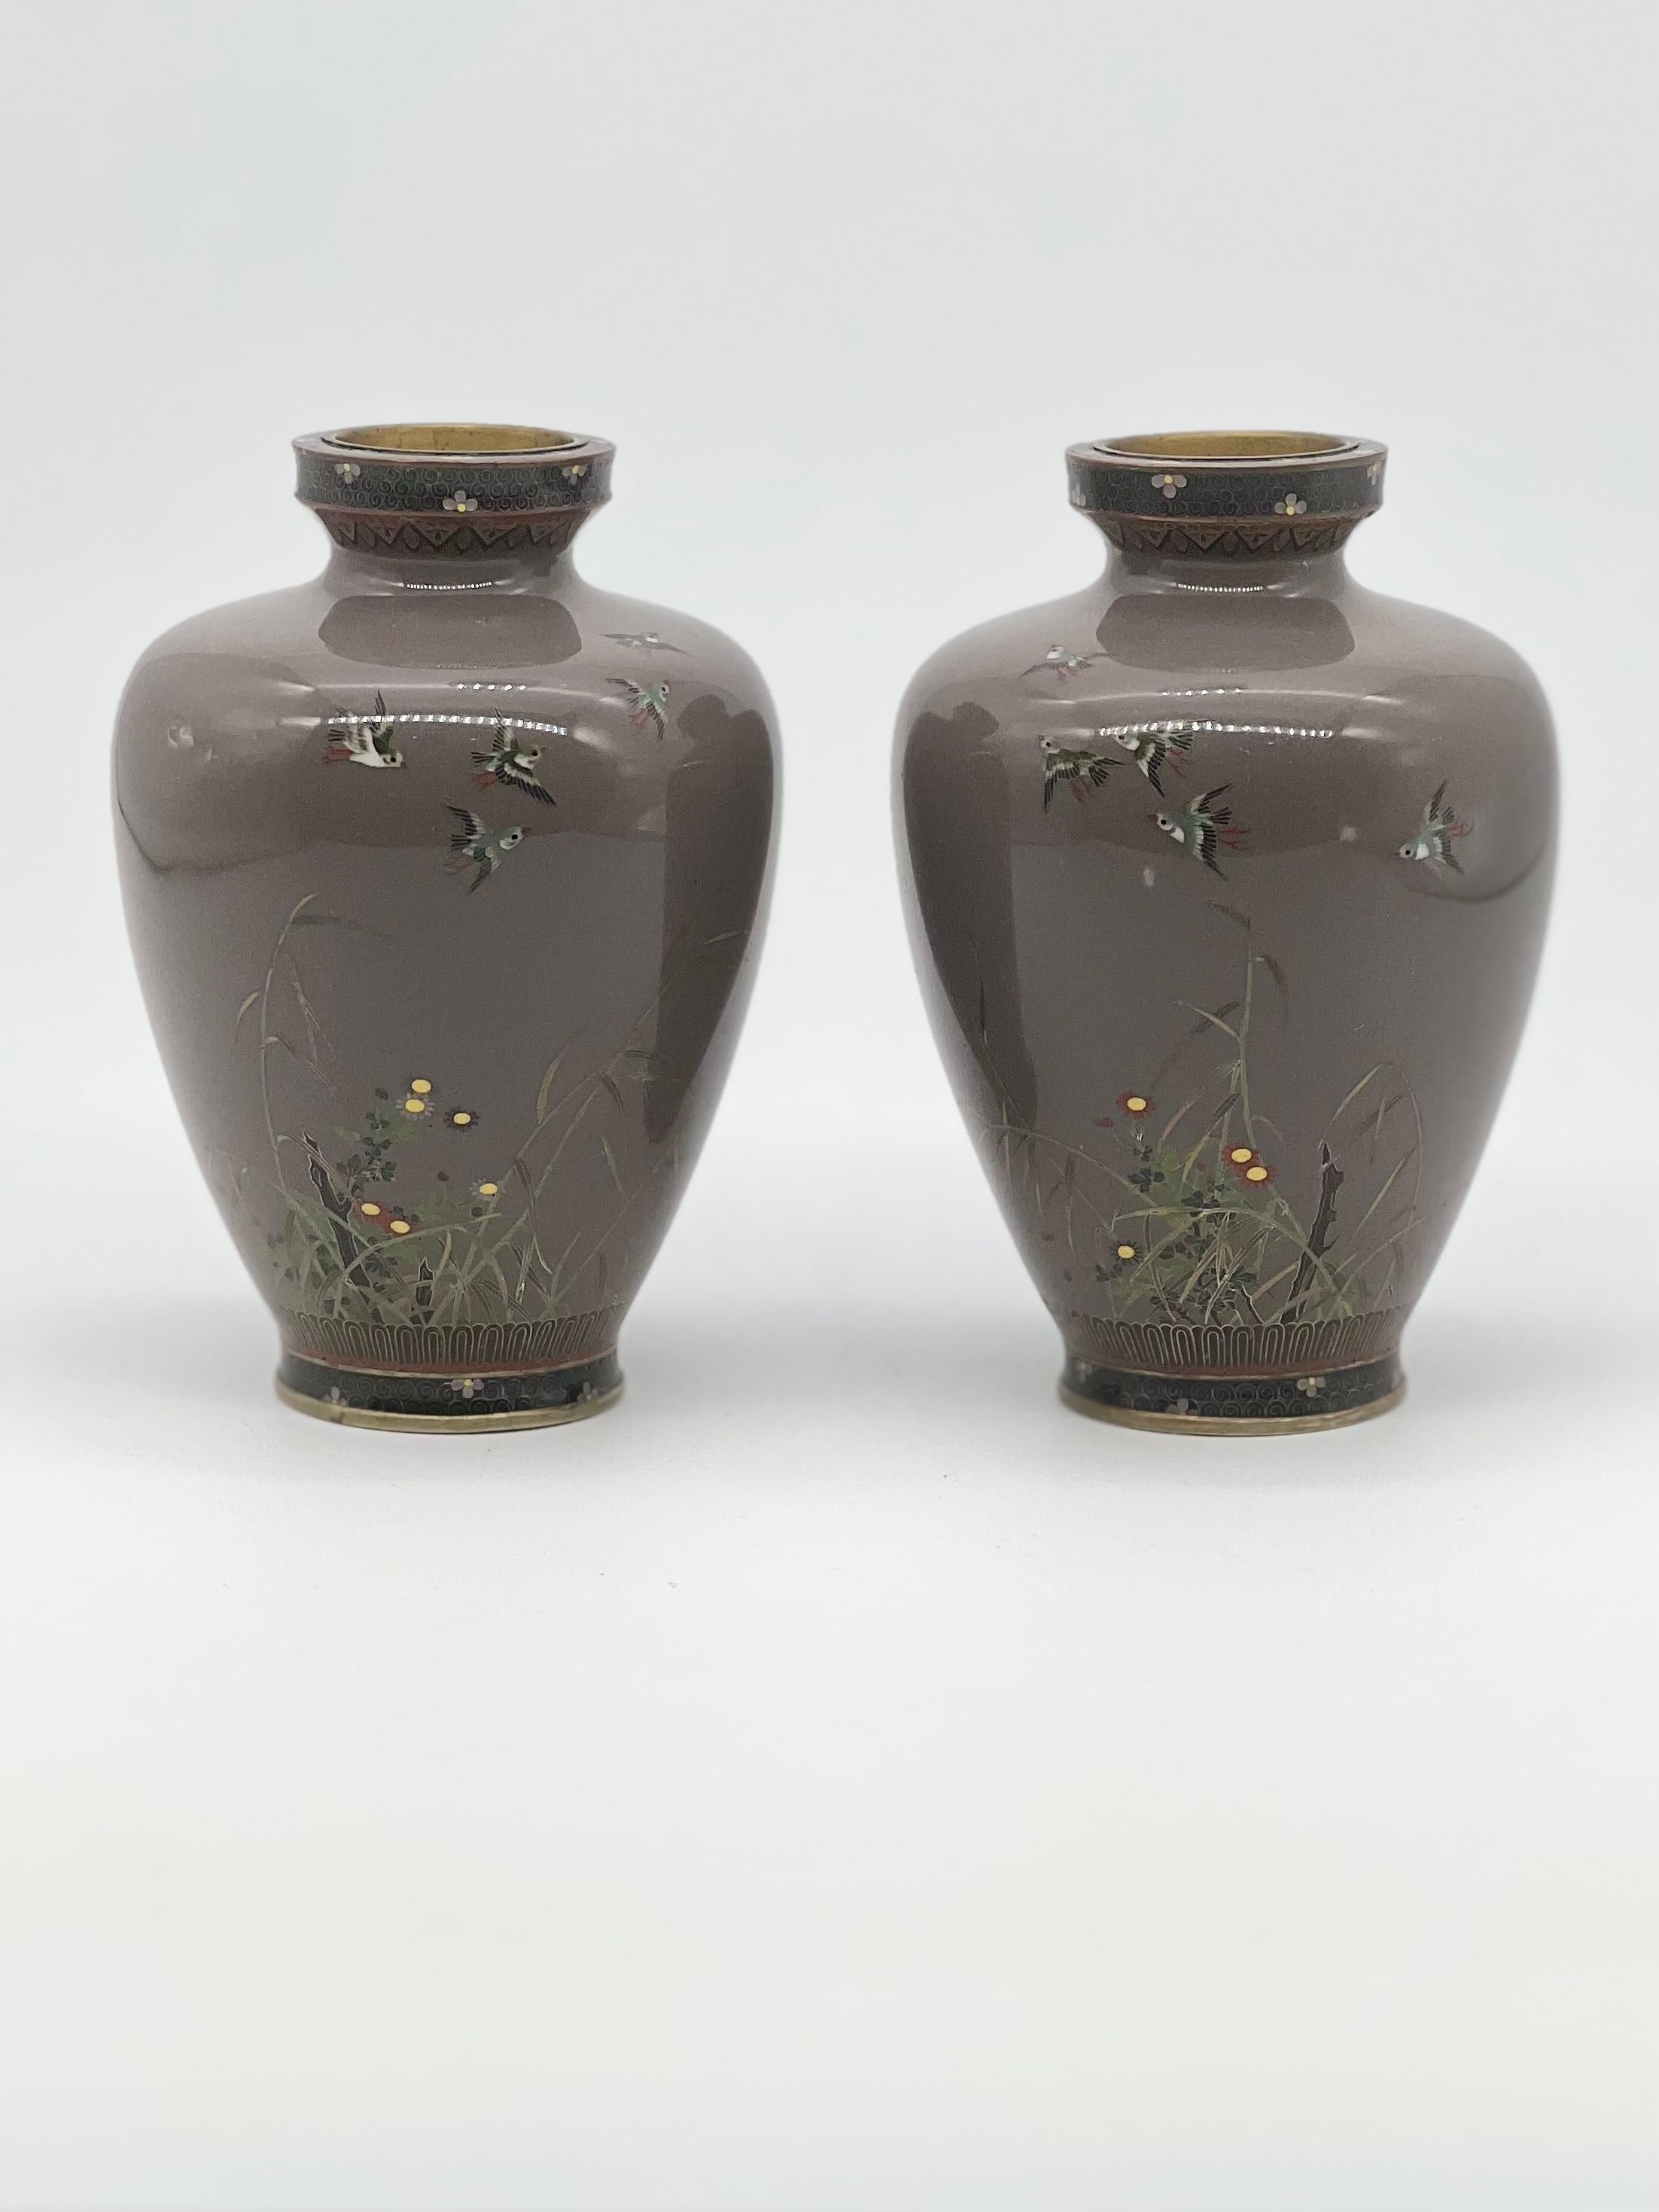 A Fine Pair of Japanese Cloisonne Enamel Vases Attributed to Hayashi Kodenji For Sale 14